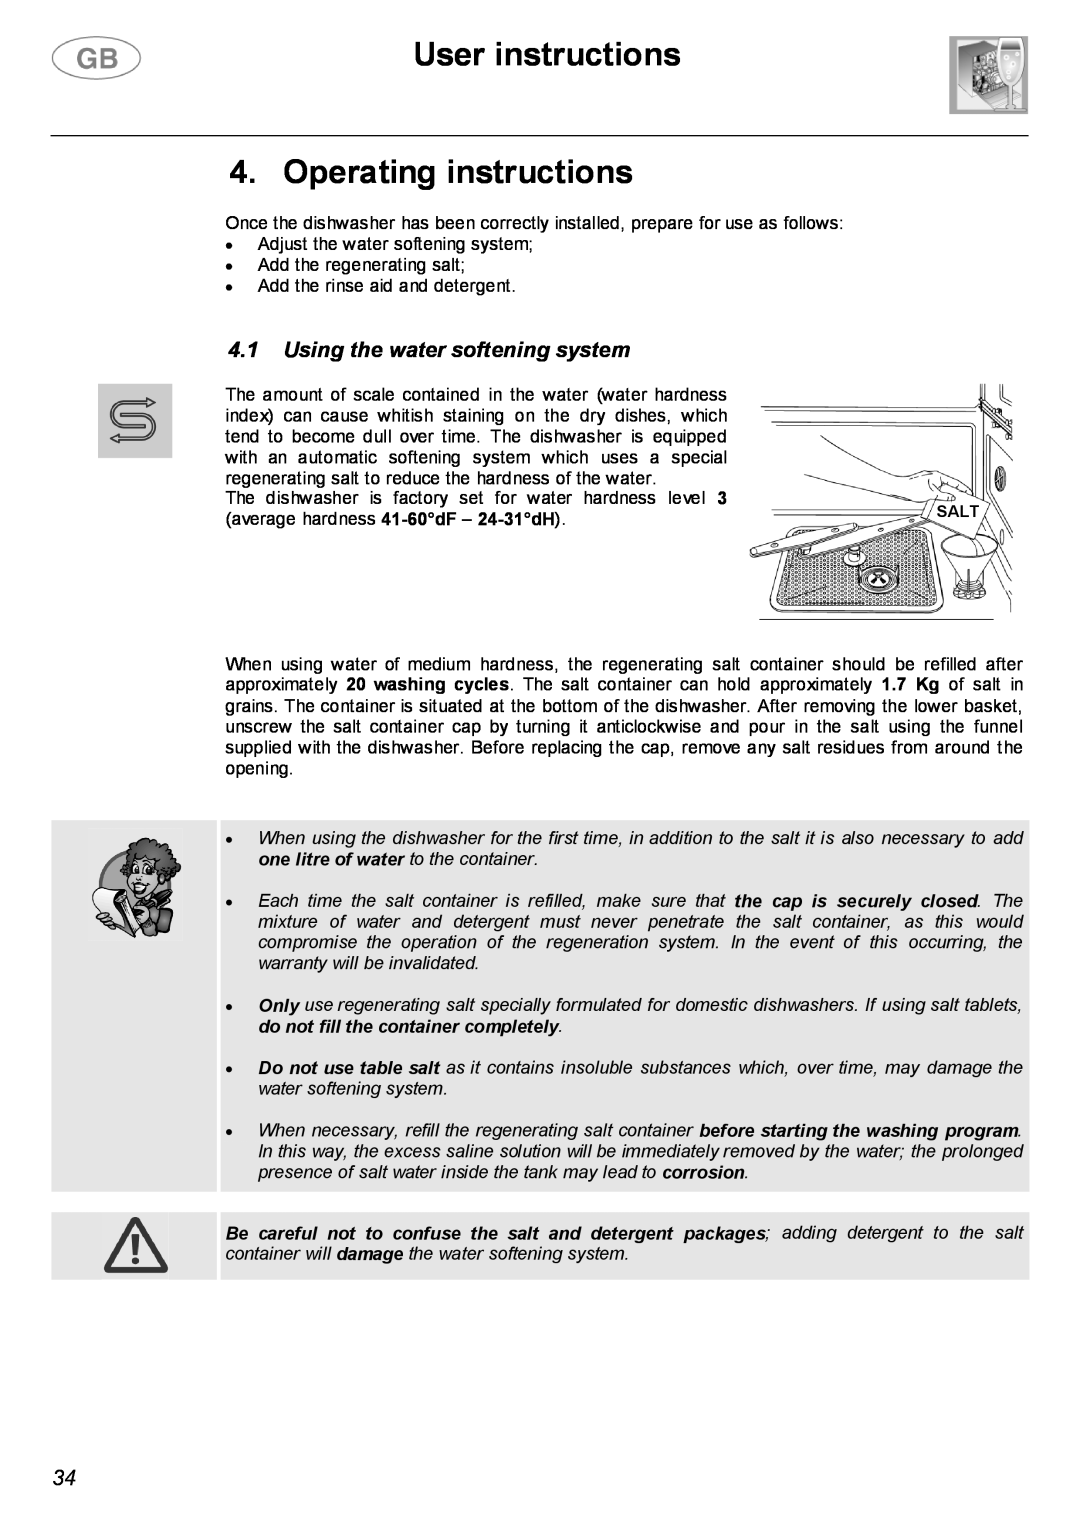 Smeg LVF32G instruction manual User instructions 4. Operating instructions, Using the water softening system 